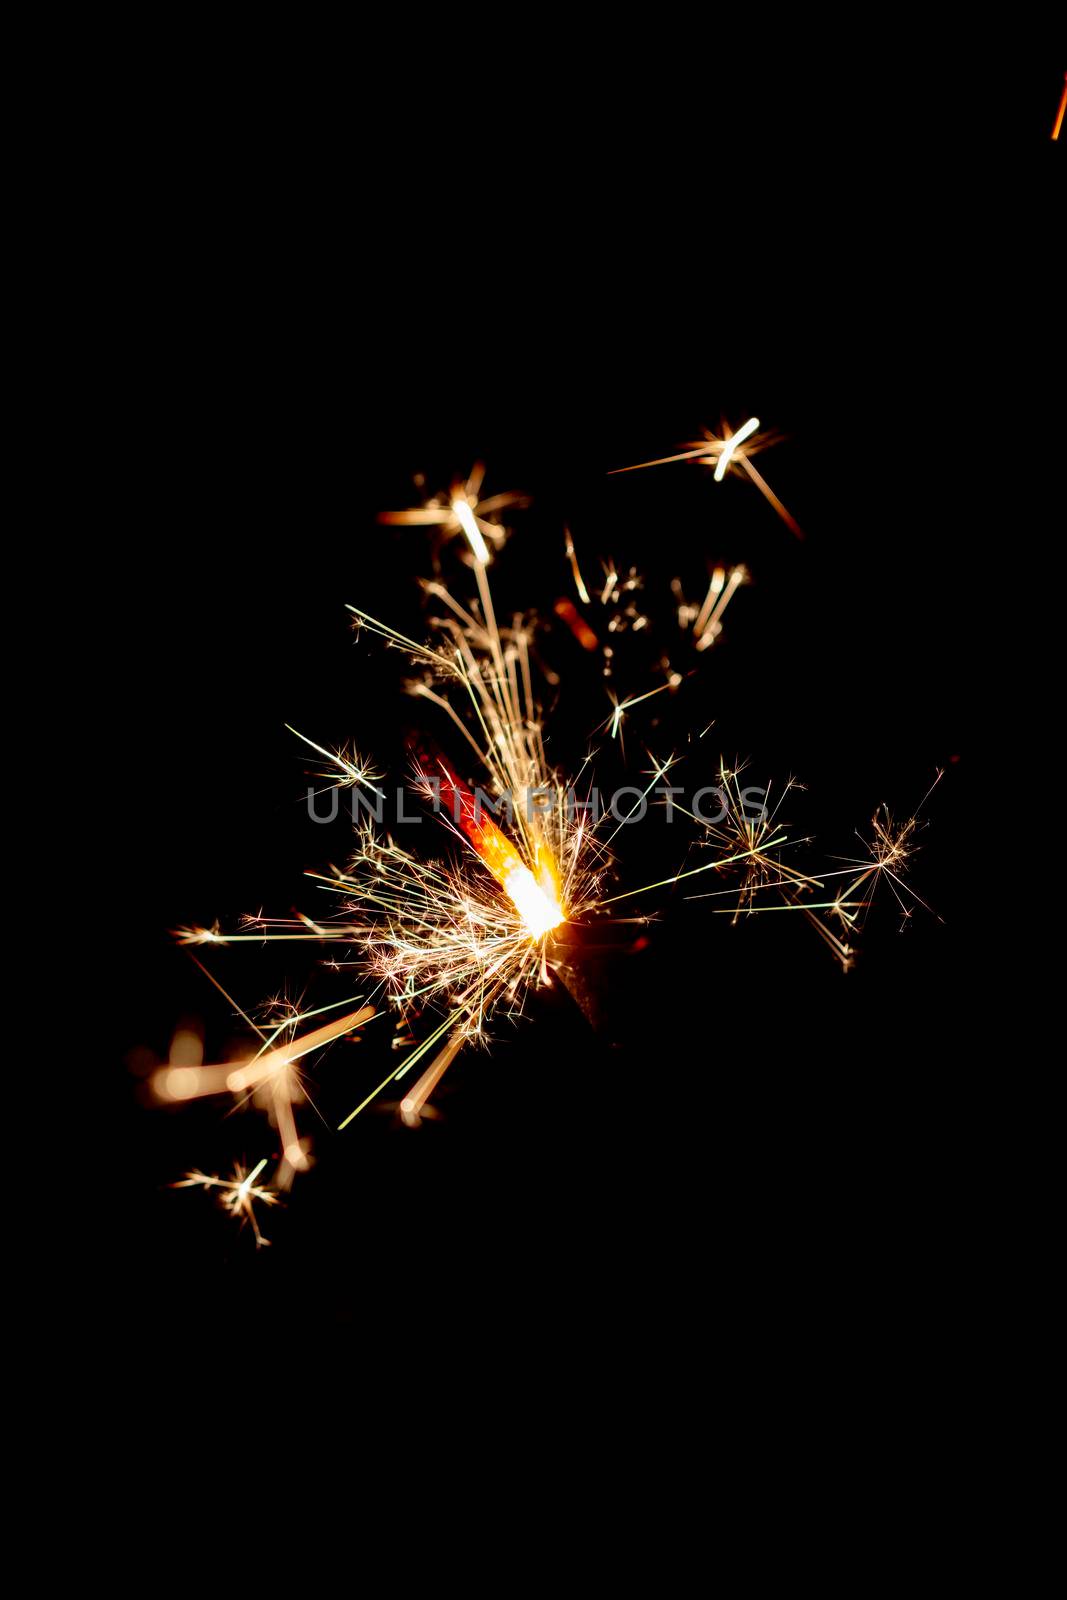 One bengal fire sparkles against the black background. by gitusik